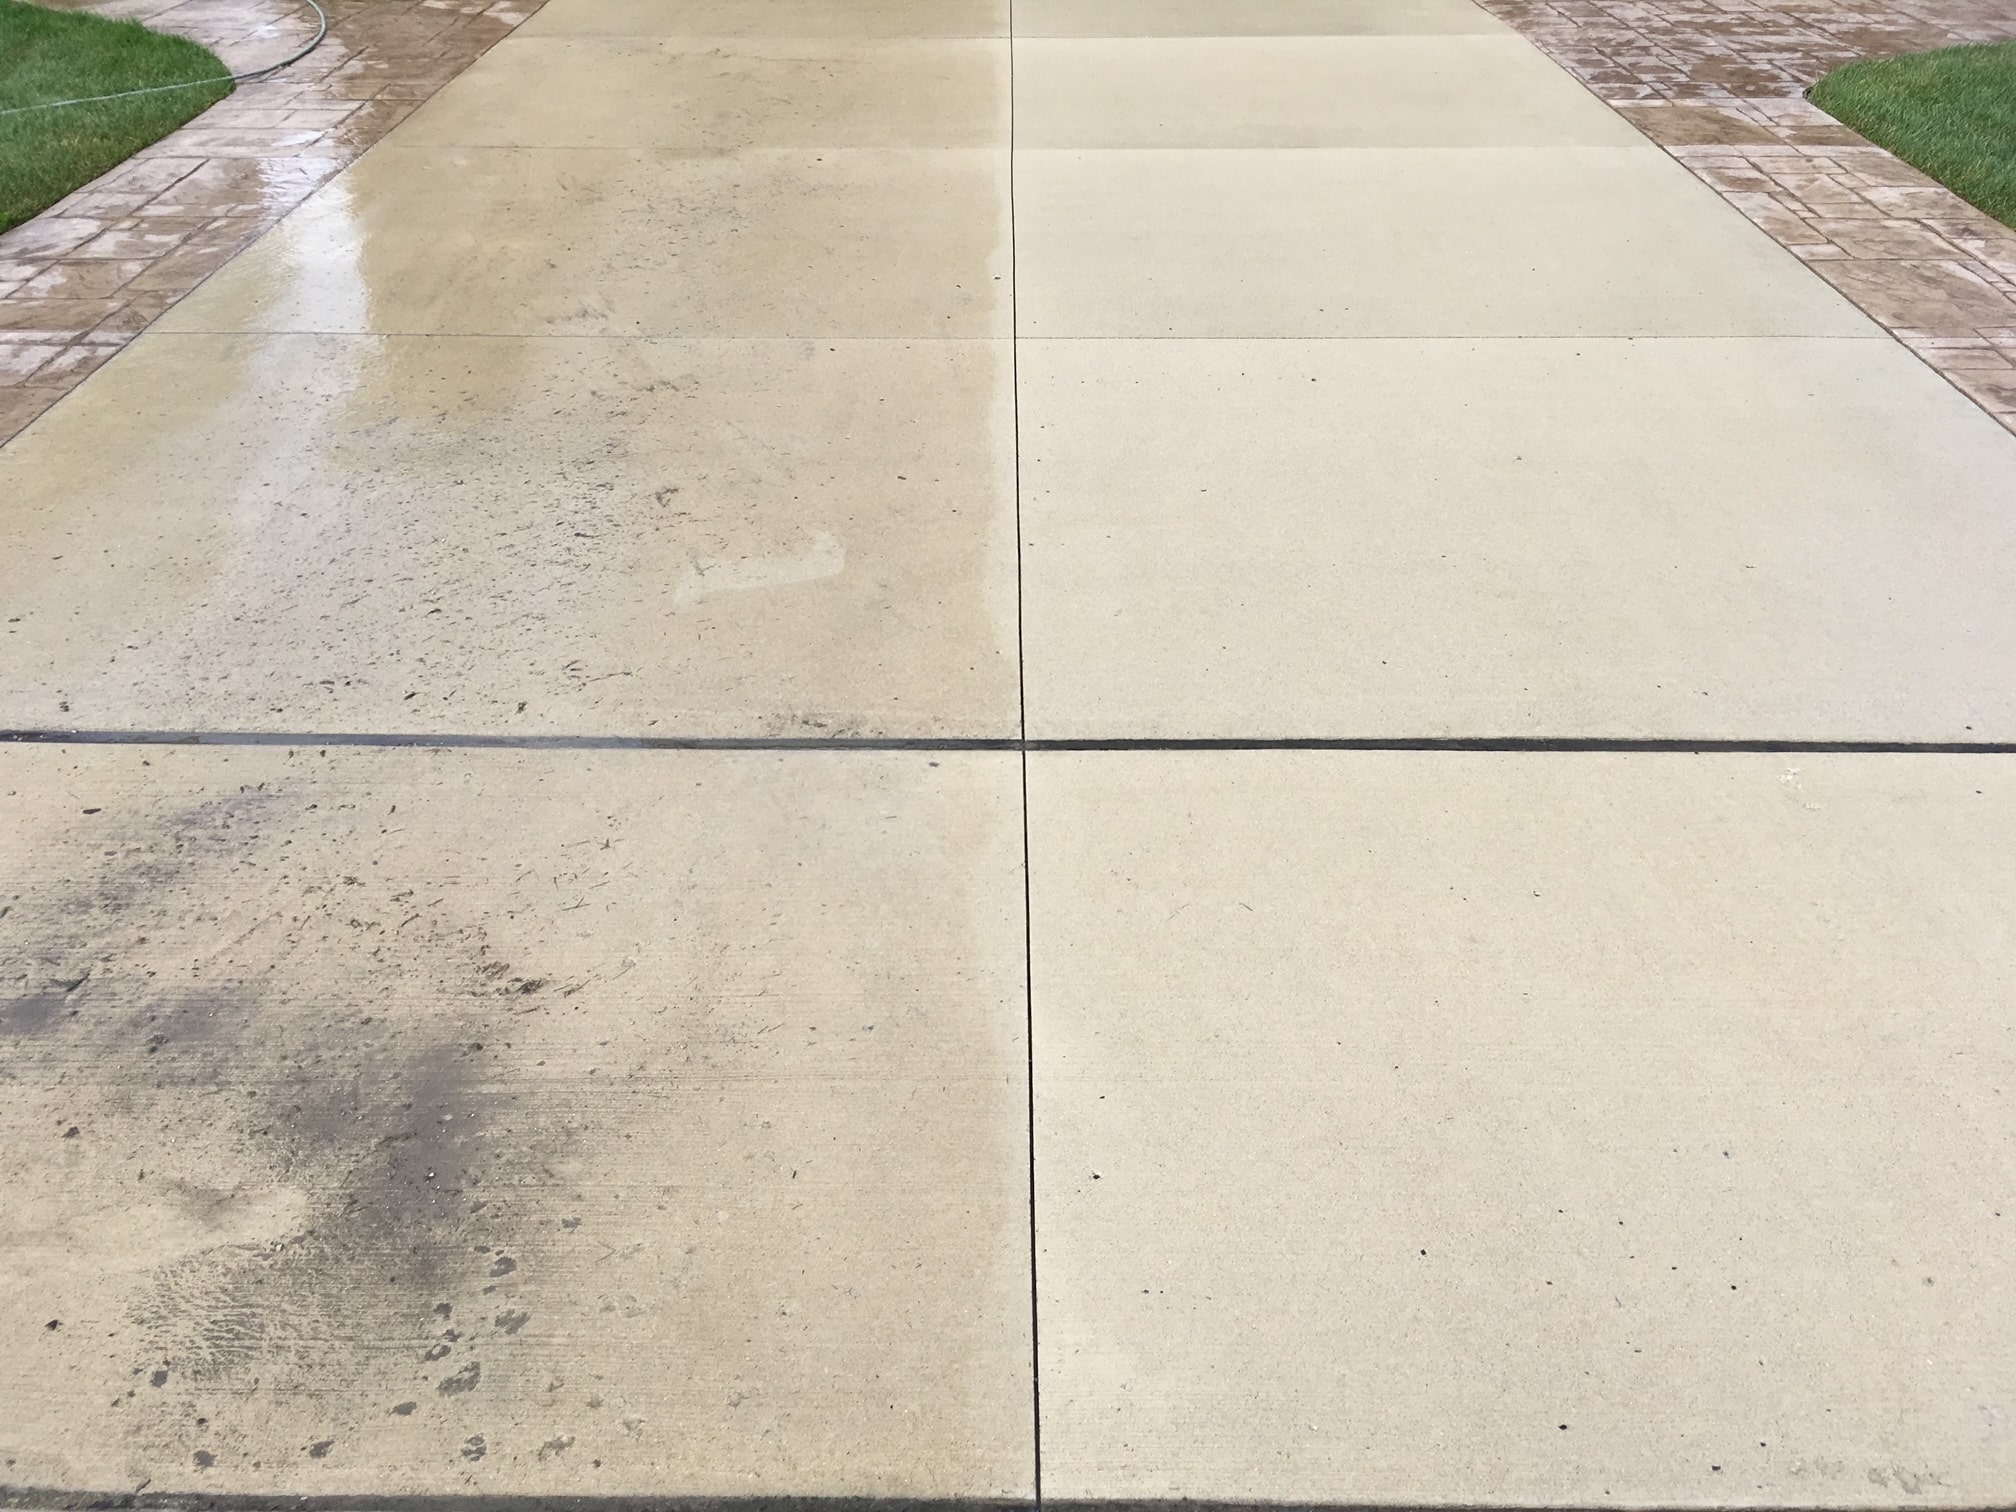 driveway cleaning in Washington township